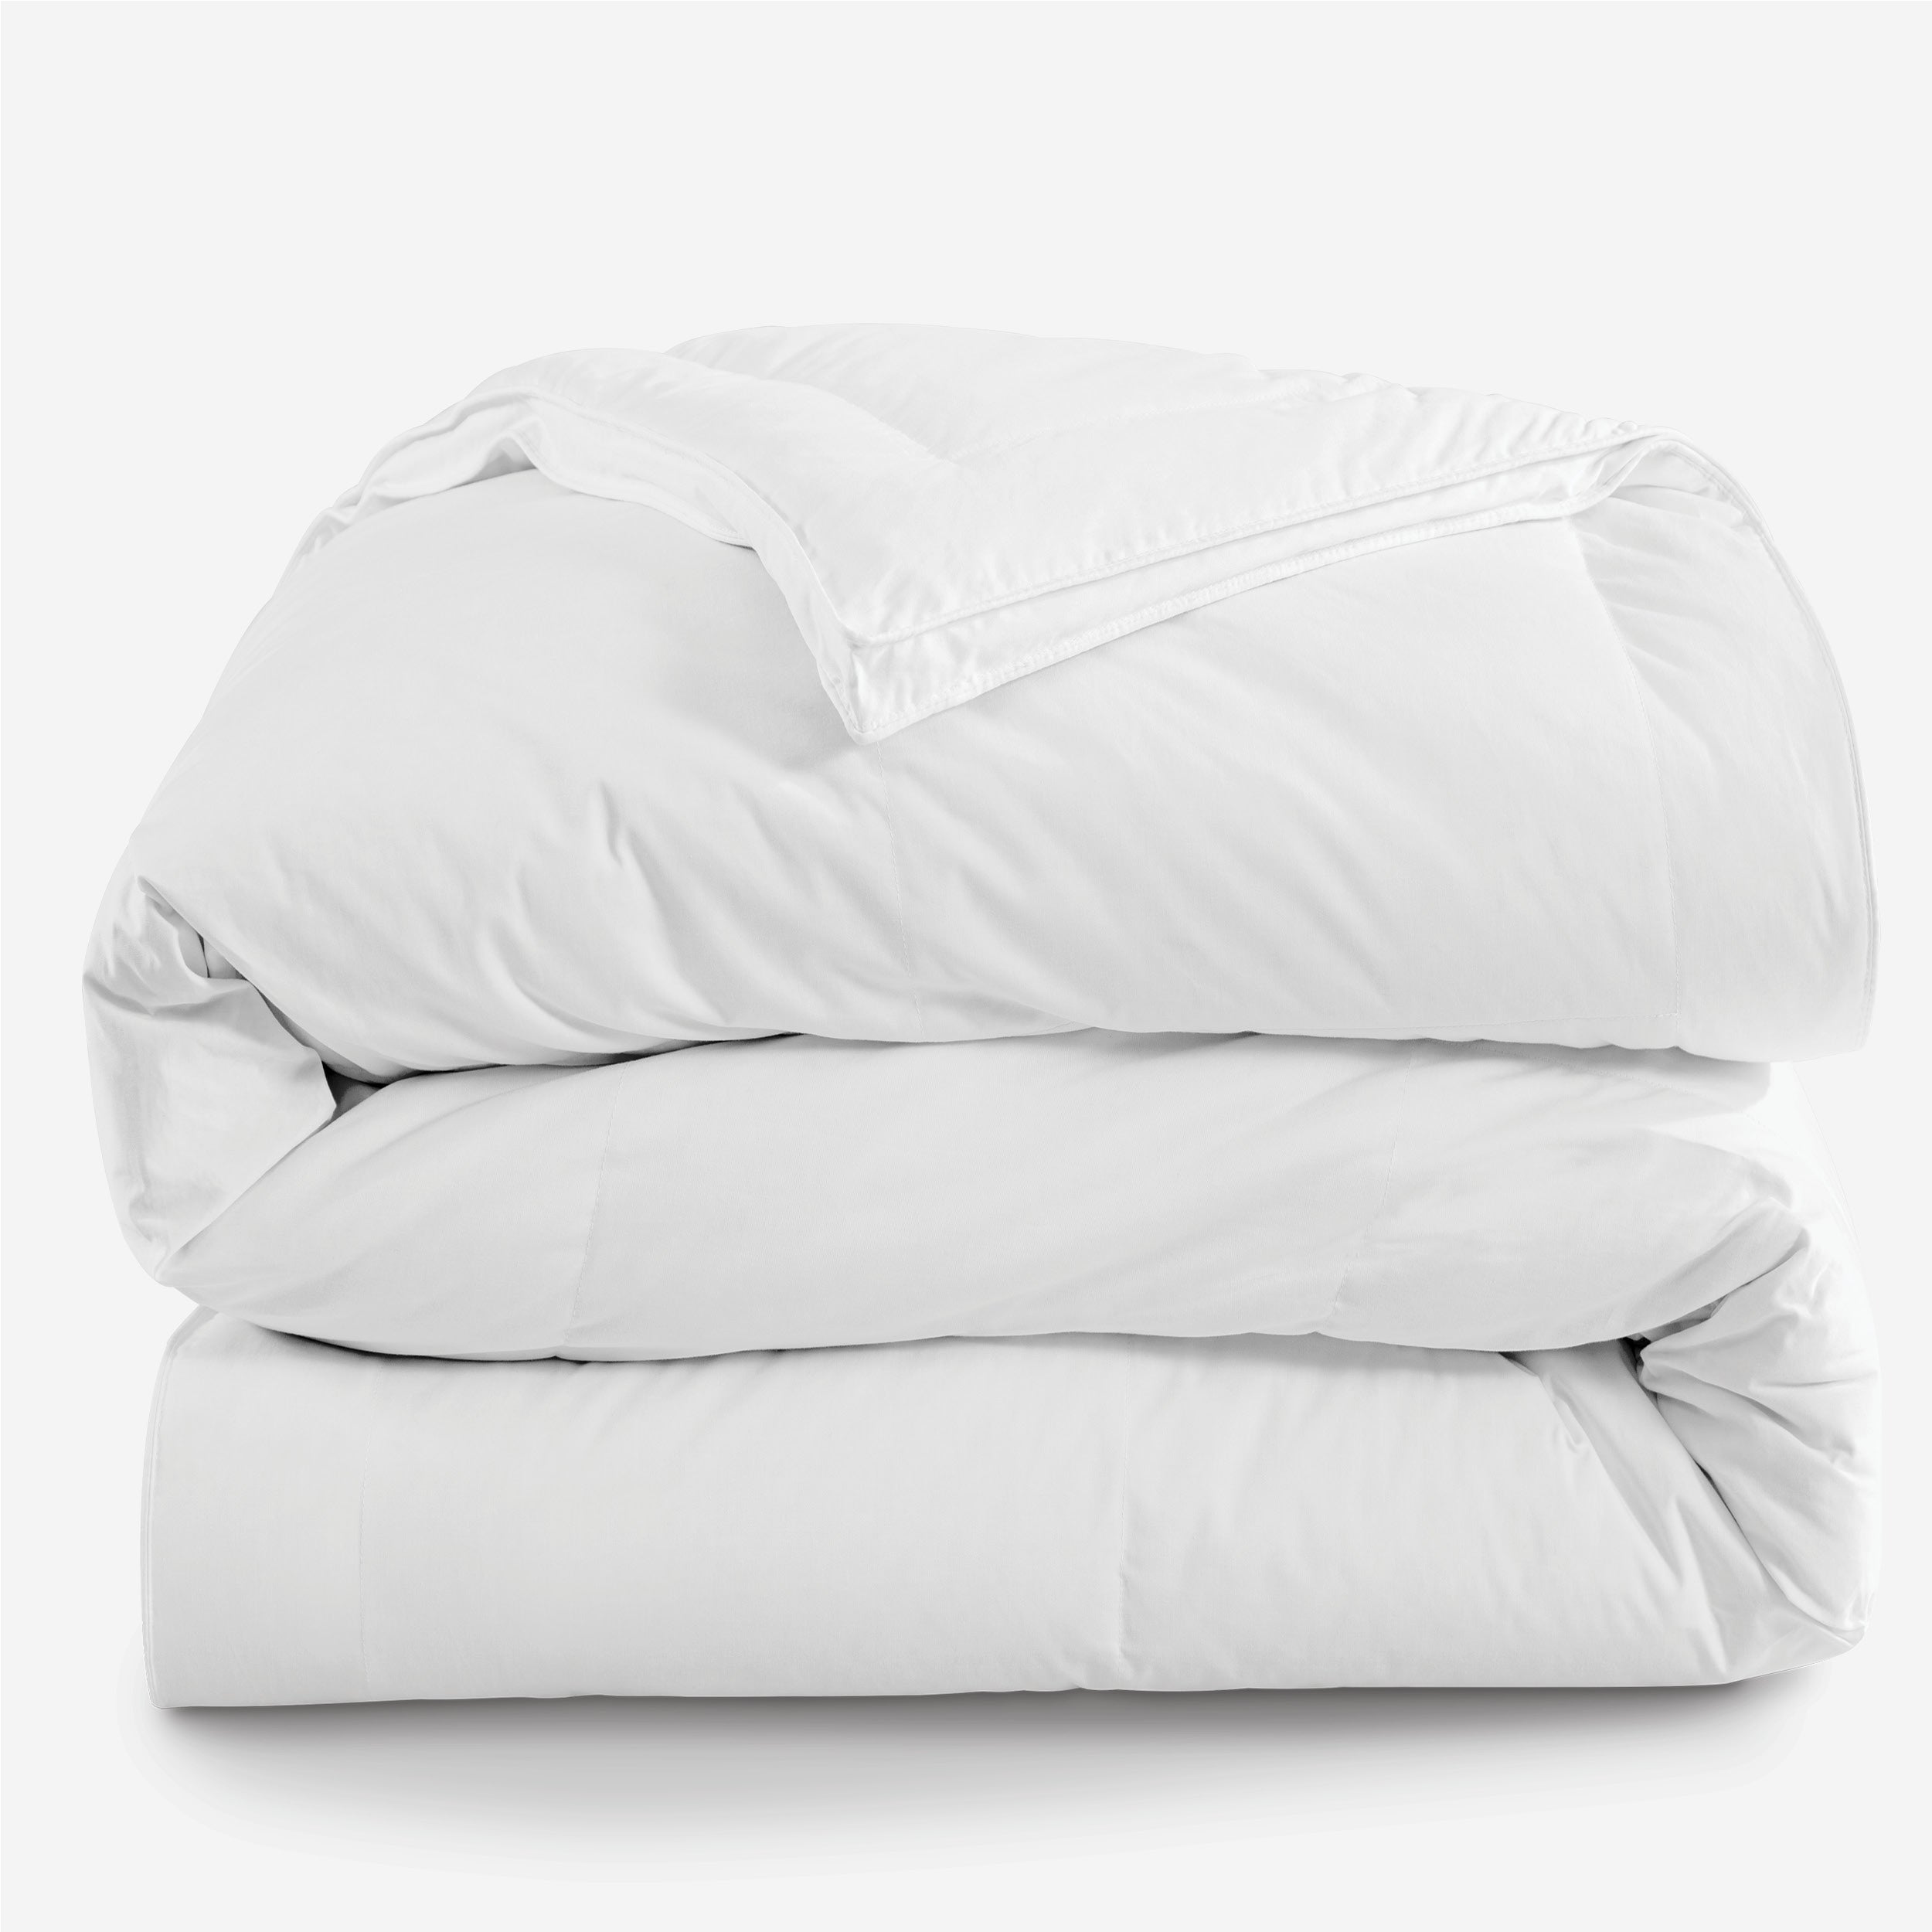 Dn Downcomforter White Categoryimage 2A91B23D 7891 4D40 864E 0Cea084Ffeed from Bare Home.